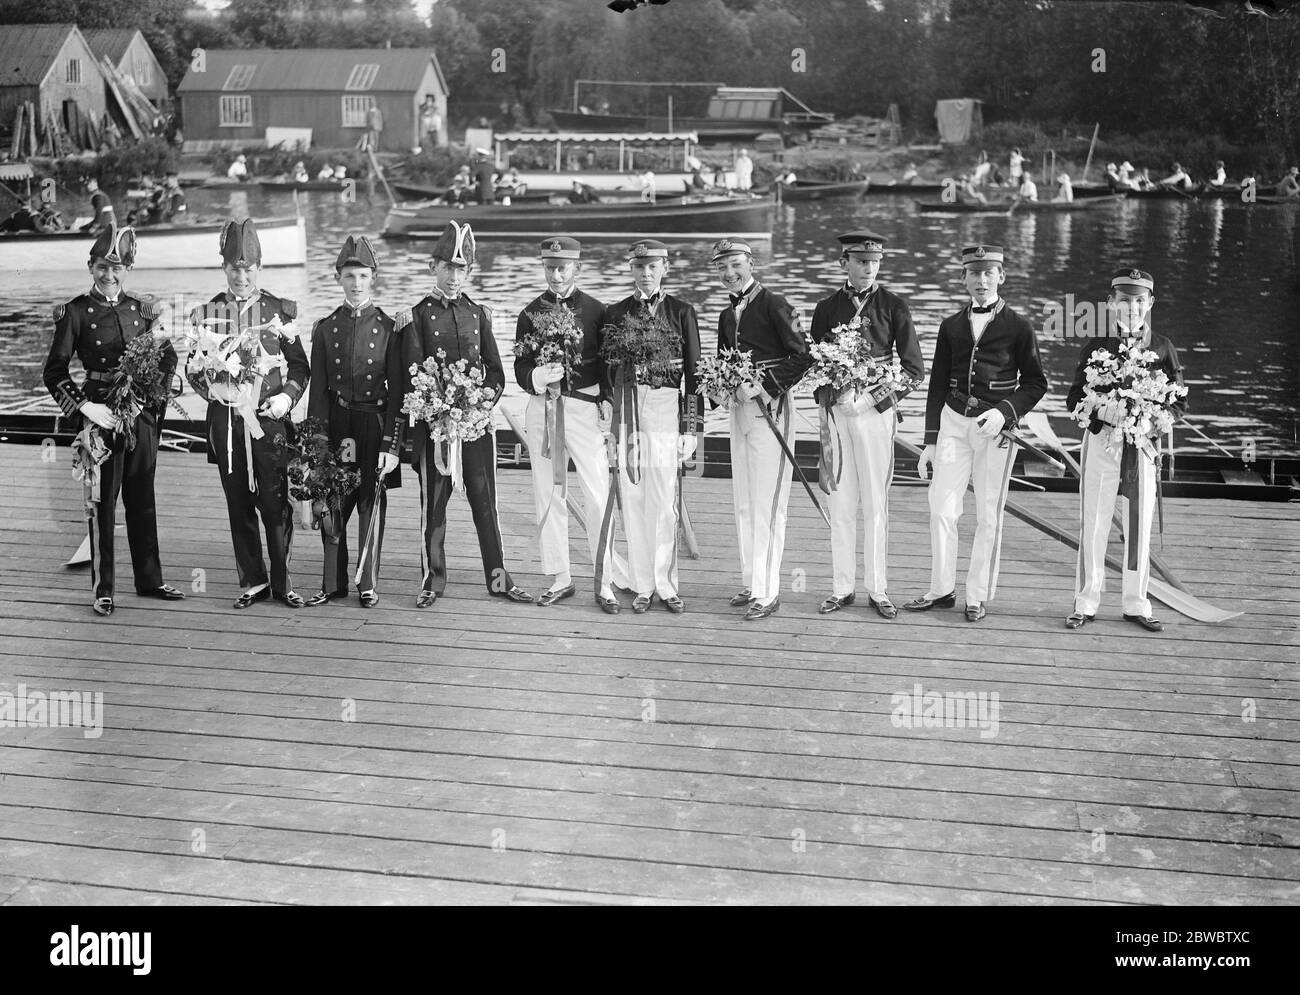 Fourth of June celebrations at Eton . Coxswains in their picturesque uniforms ready for the procession of boats . 4 June 1925 Stock Photo